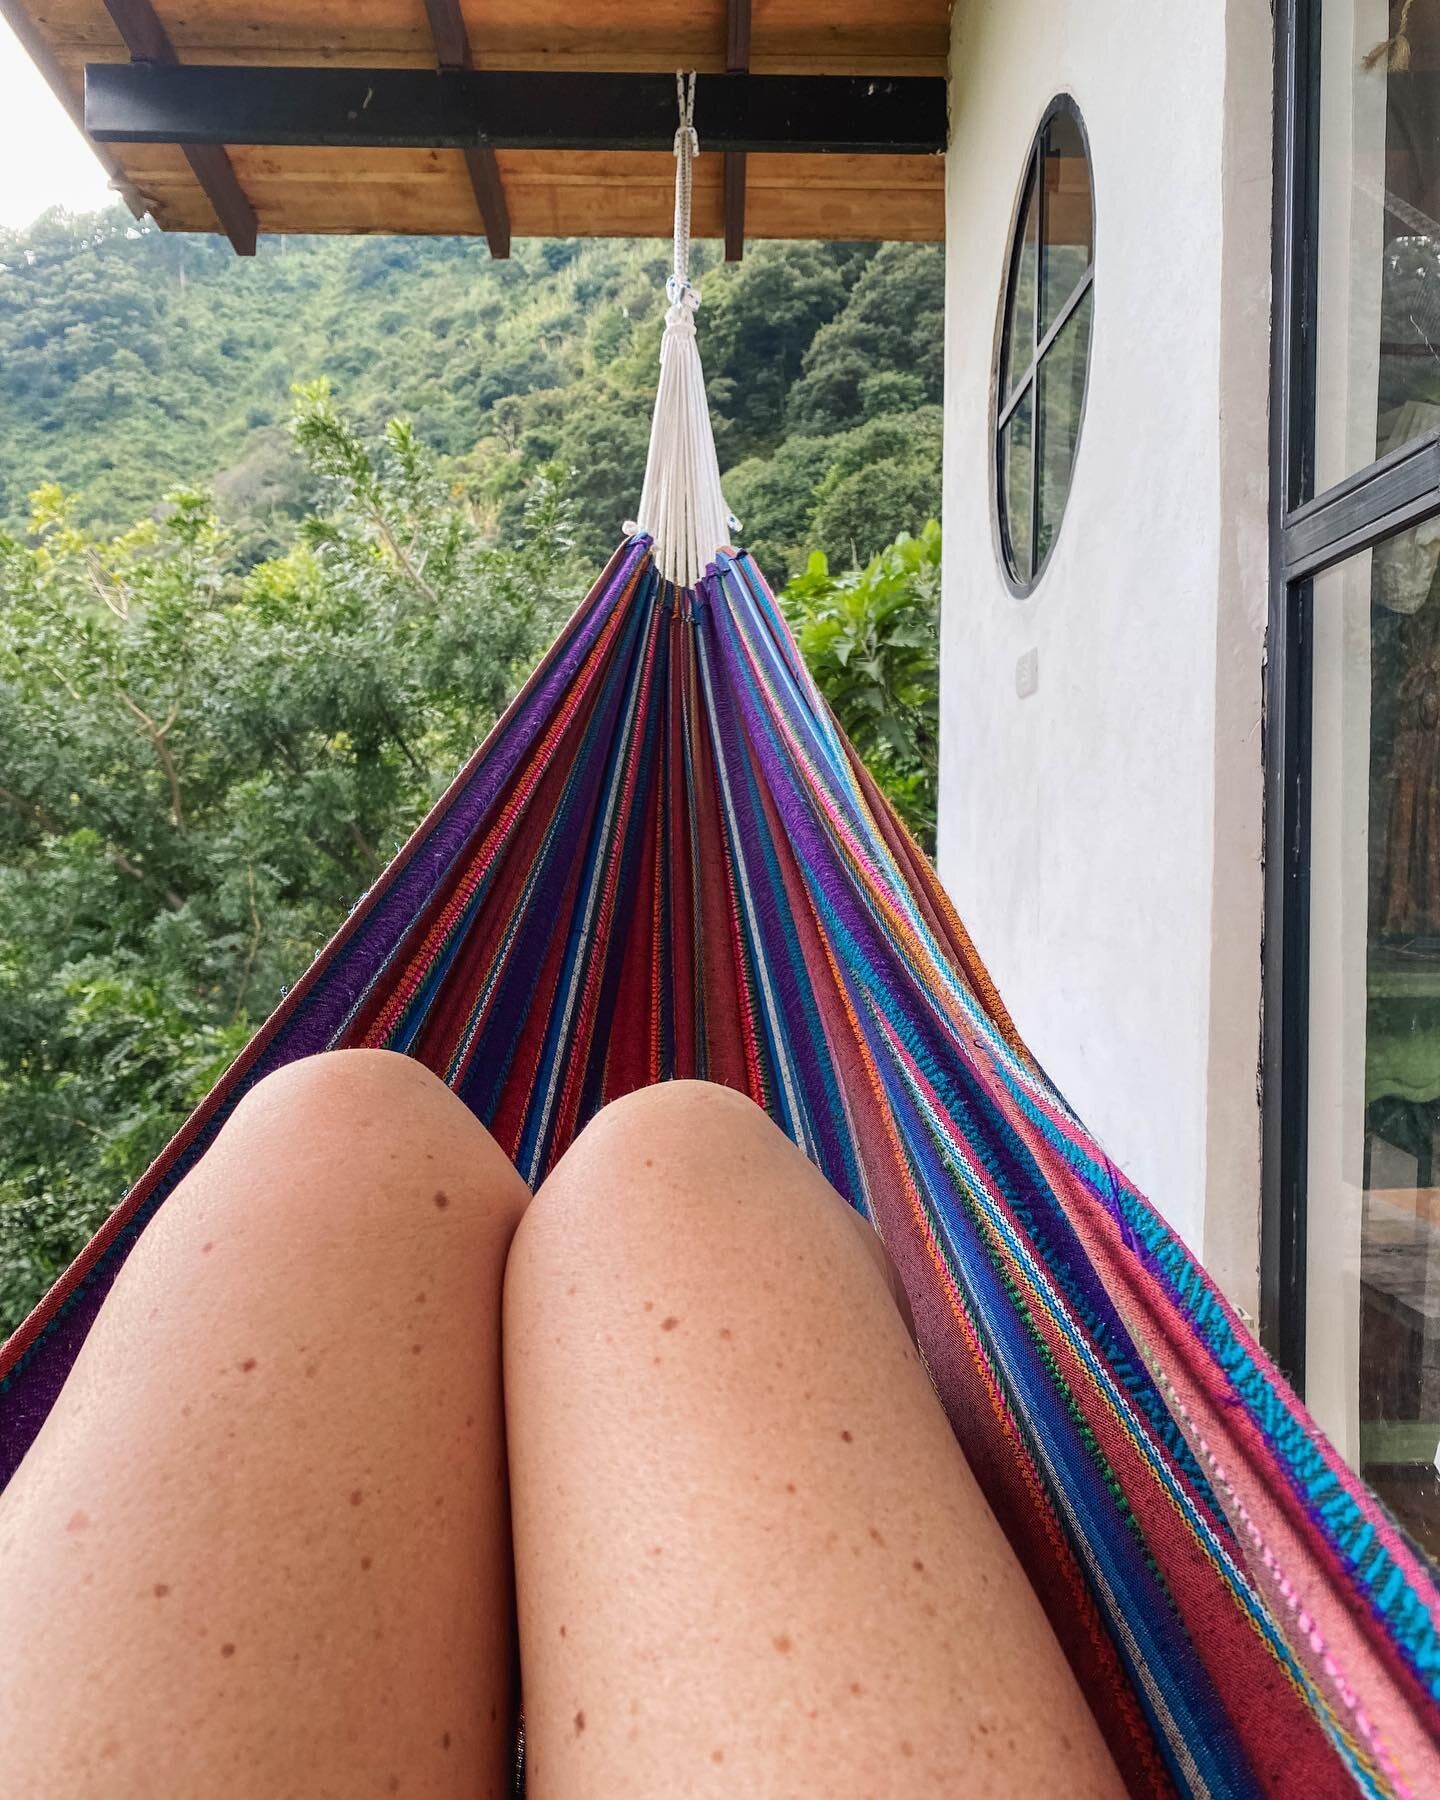 It's my travel 1-year anniversaryyy, and counting... 🥾⛰️🧭

6 months in Mexico, and now 6+ months in Guatemala. 

It's the 3rd time in my life I've spent a year abroad, and I'll likely be country hoppin' through next year, too.

Home isn't a singula